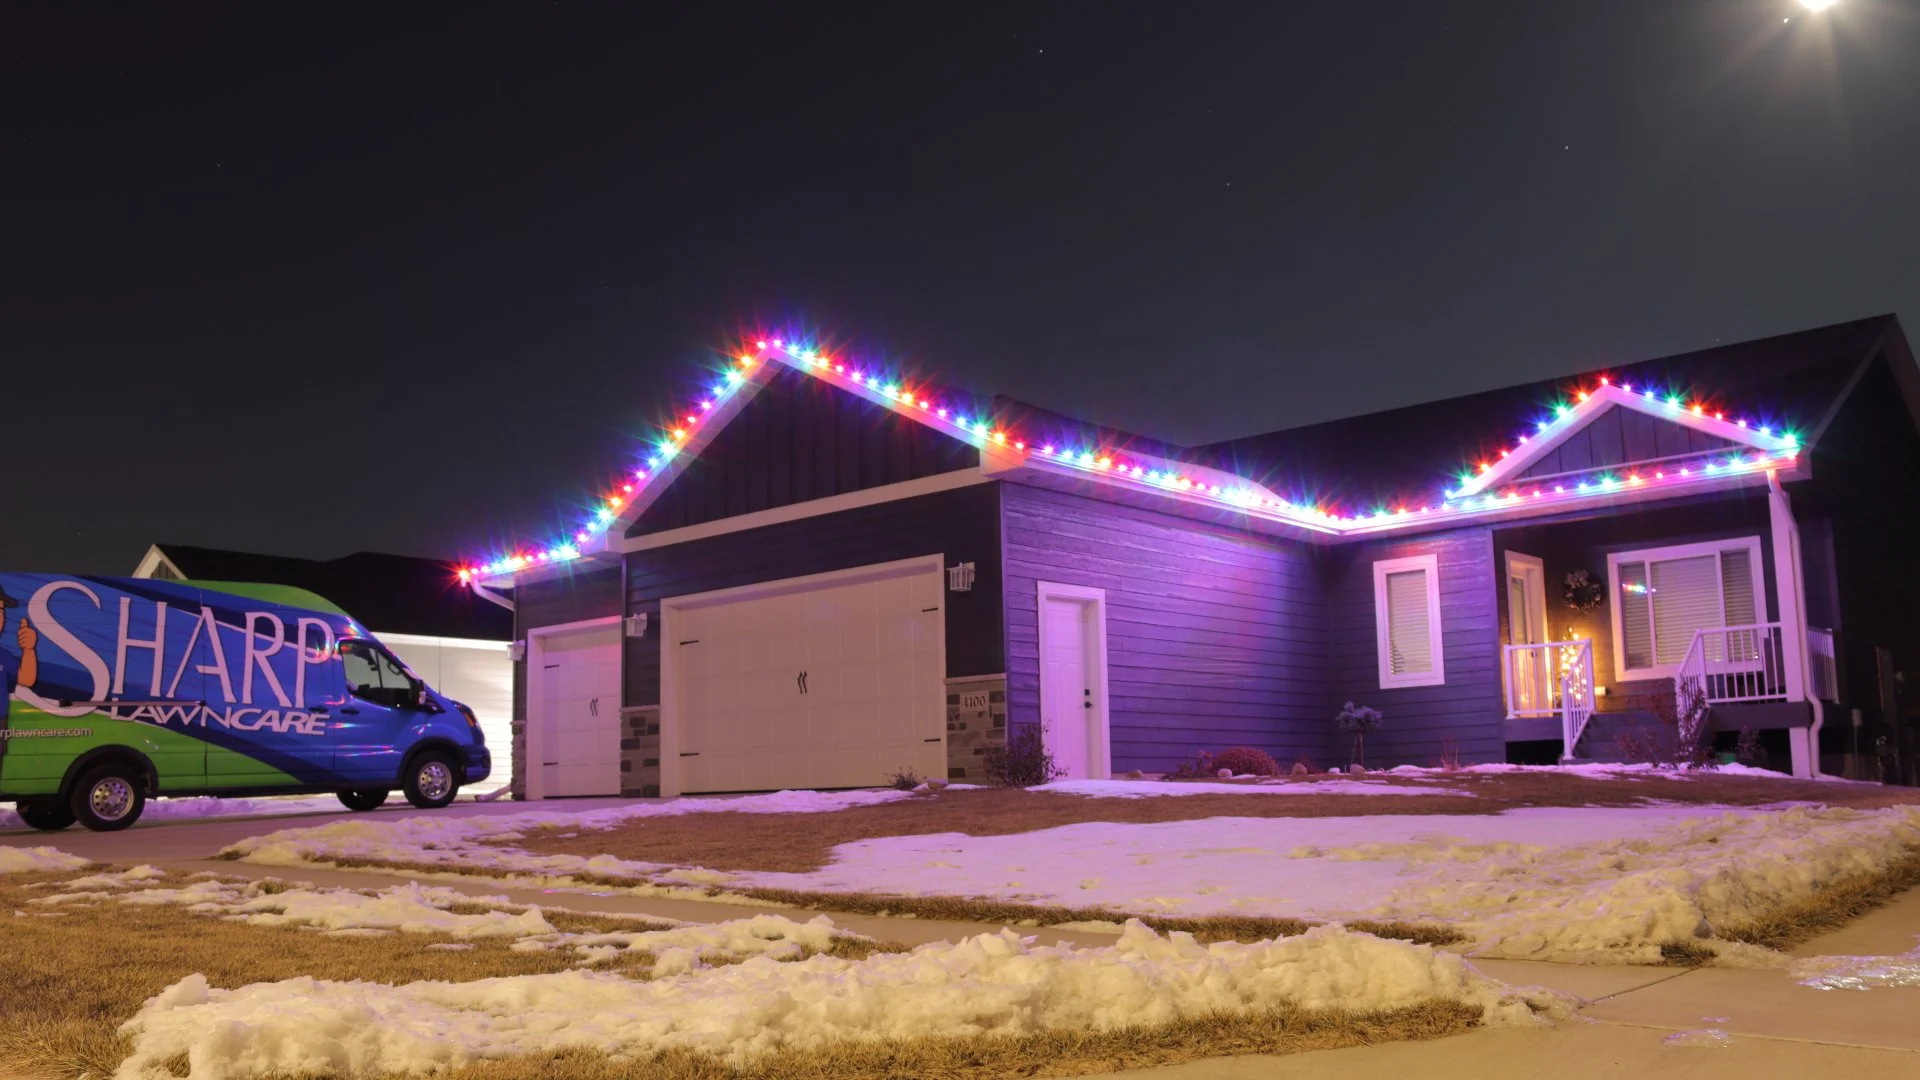 Should You Decorate Your House With White or Colored Christmas Lights?